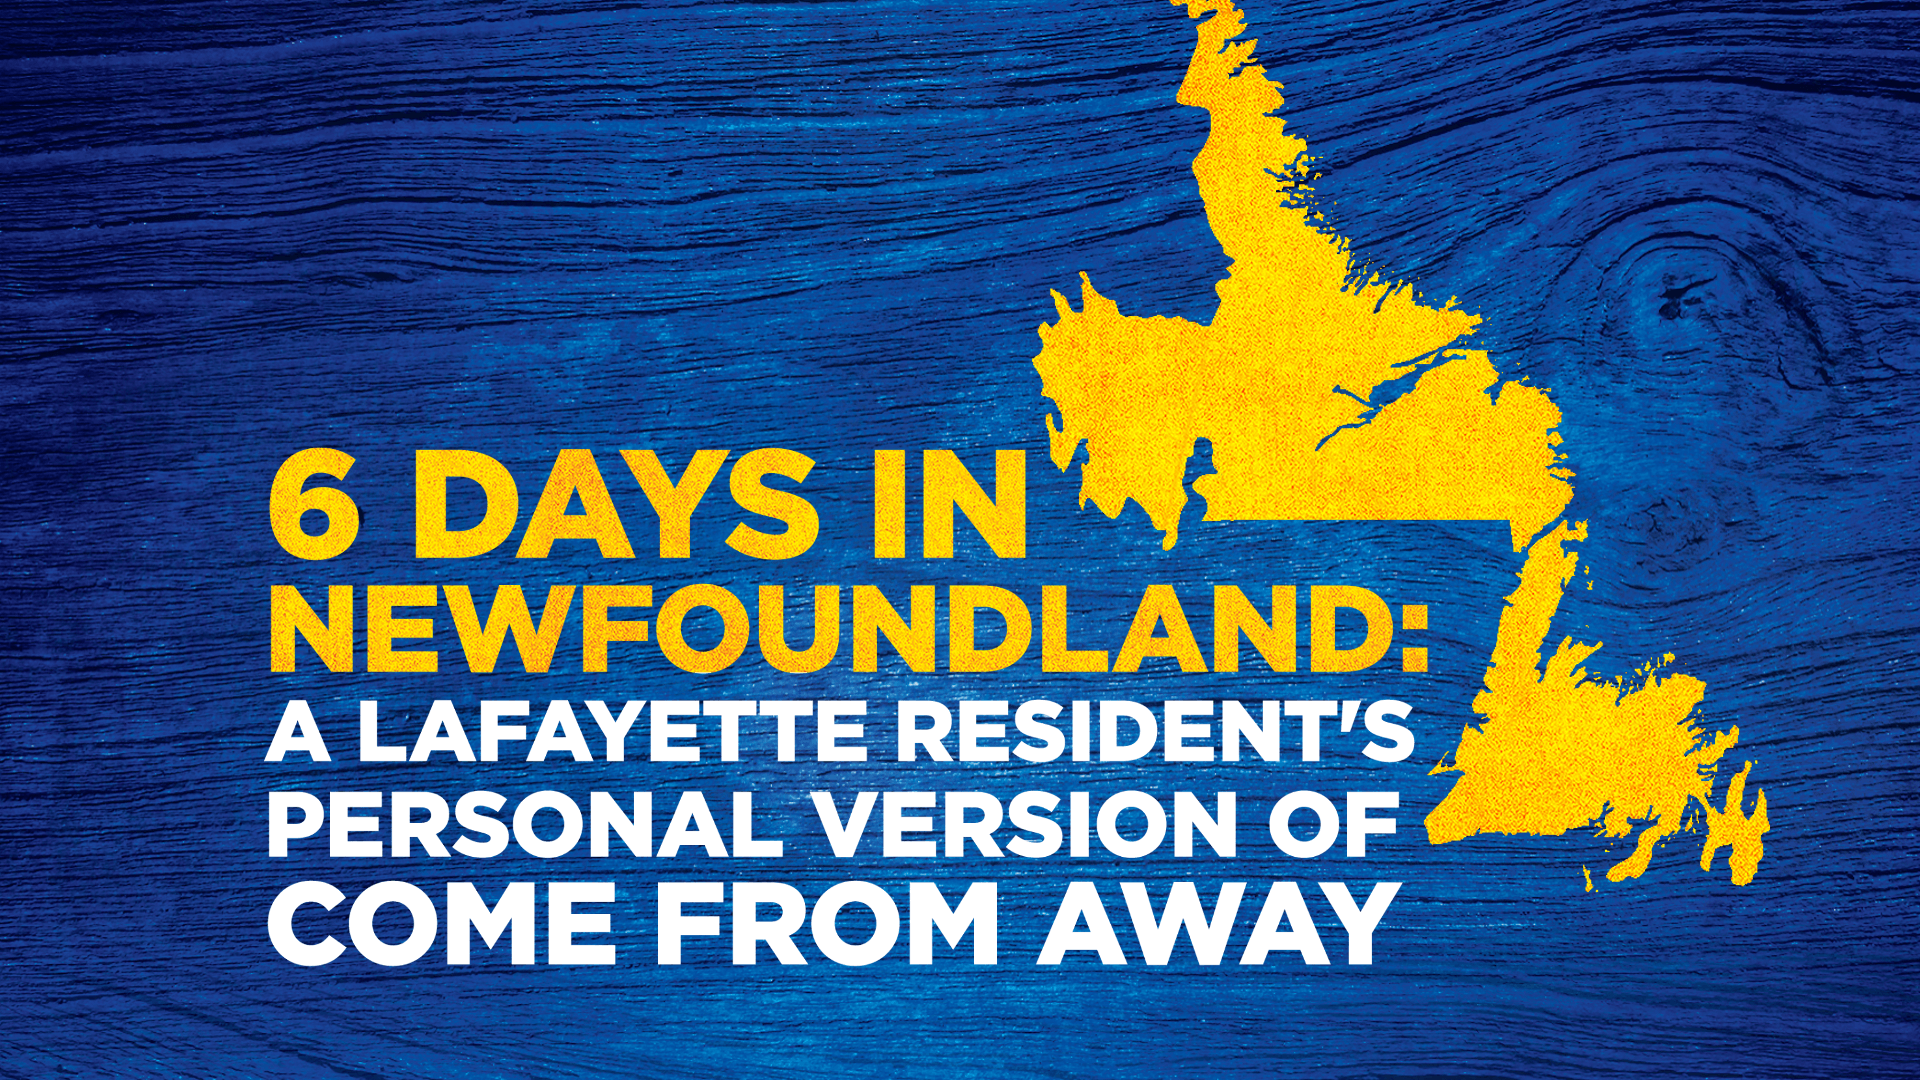 6 Days in Newfoundland: A Lafayette residen'ts personal version of Come From Away